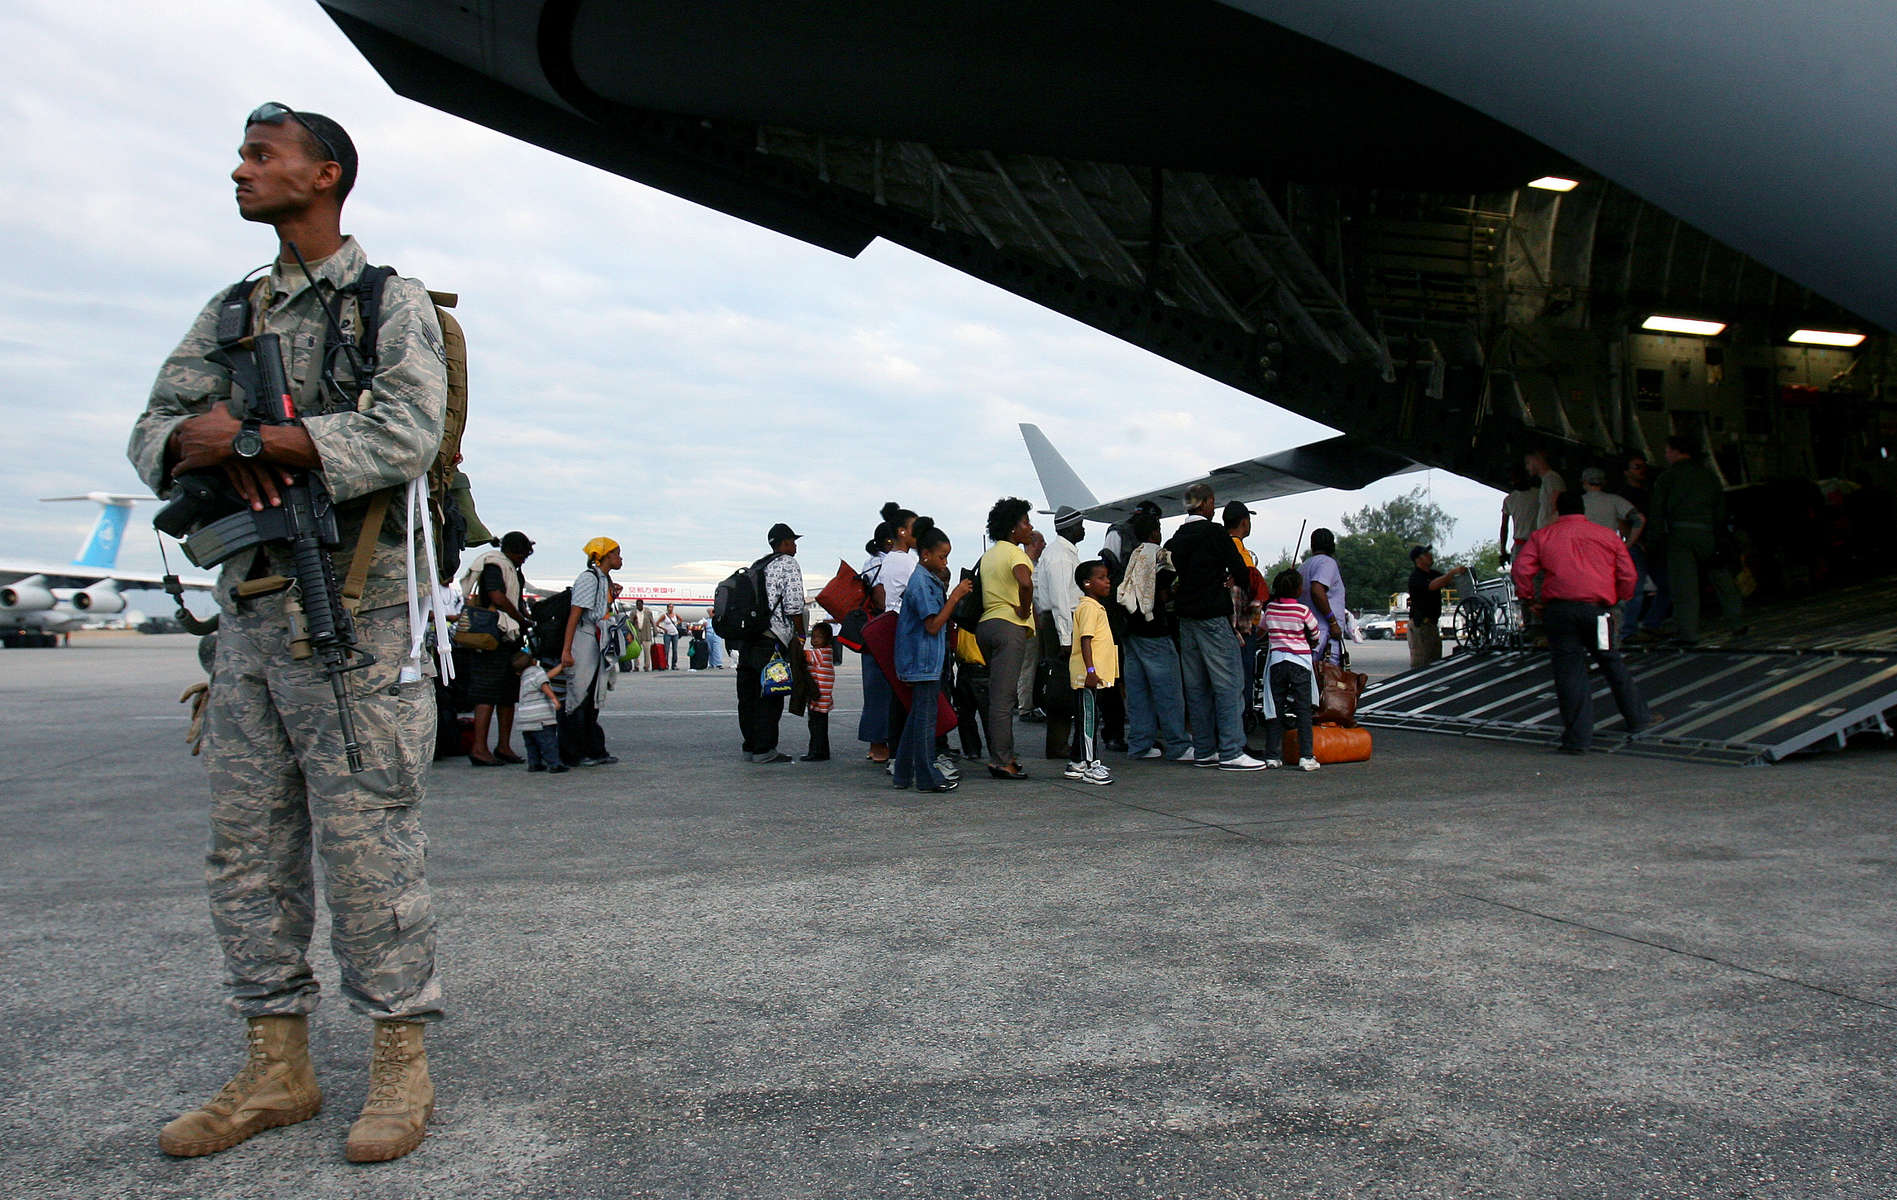 A United State Air Force security guard monitors the March Air Reserve Base C-17 aircraft while the crew boards evacuees at Port-Au-Prince International Airport in Haiti. (The Press-Enterprise/ Mark Zaleski)